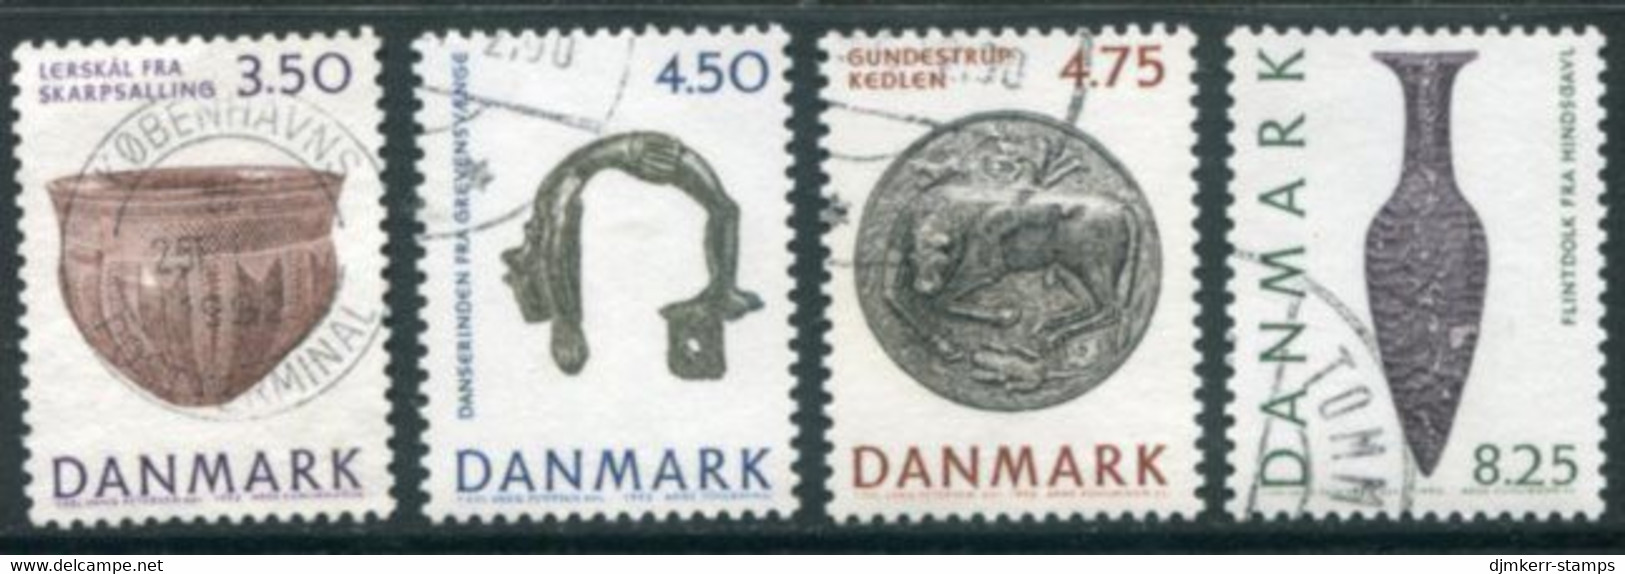 DENMARK 1992 Re-opening Of National Museum Used.   Michel 1018-21 - Oblitérés